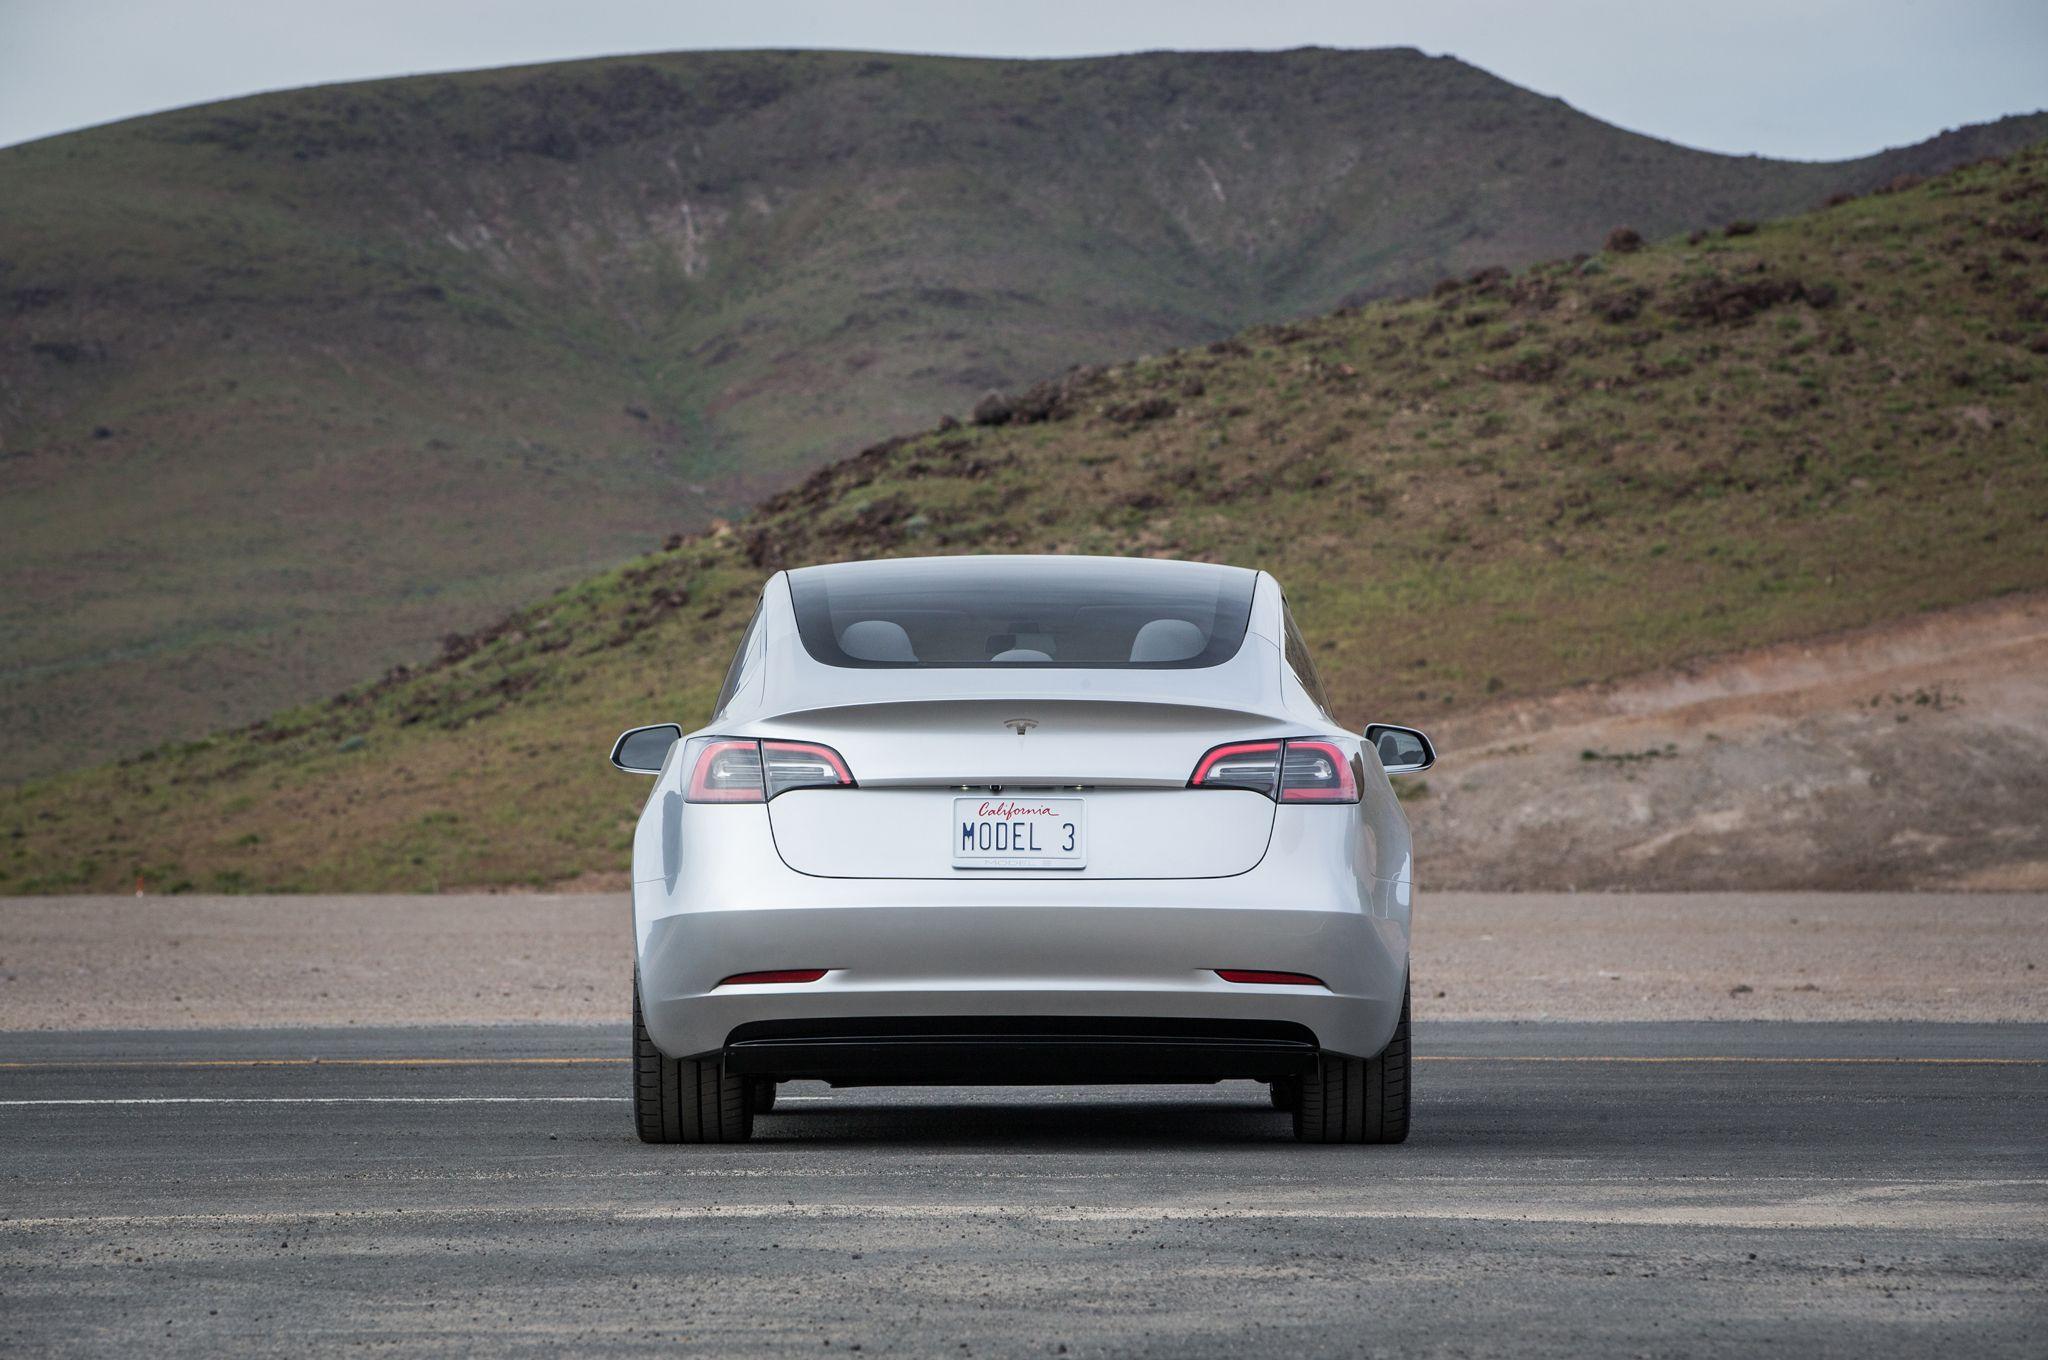 Tesla Model 3 Wallpaper HD Photo, Wallpaper and other Image